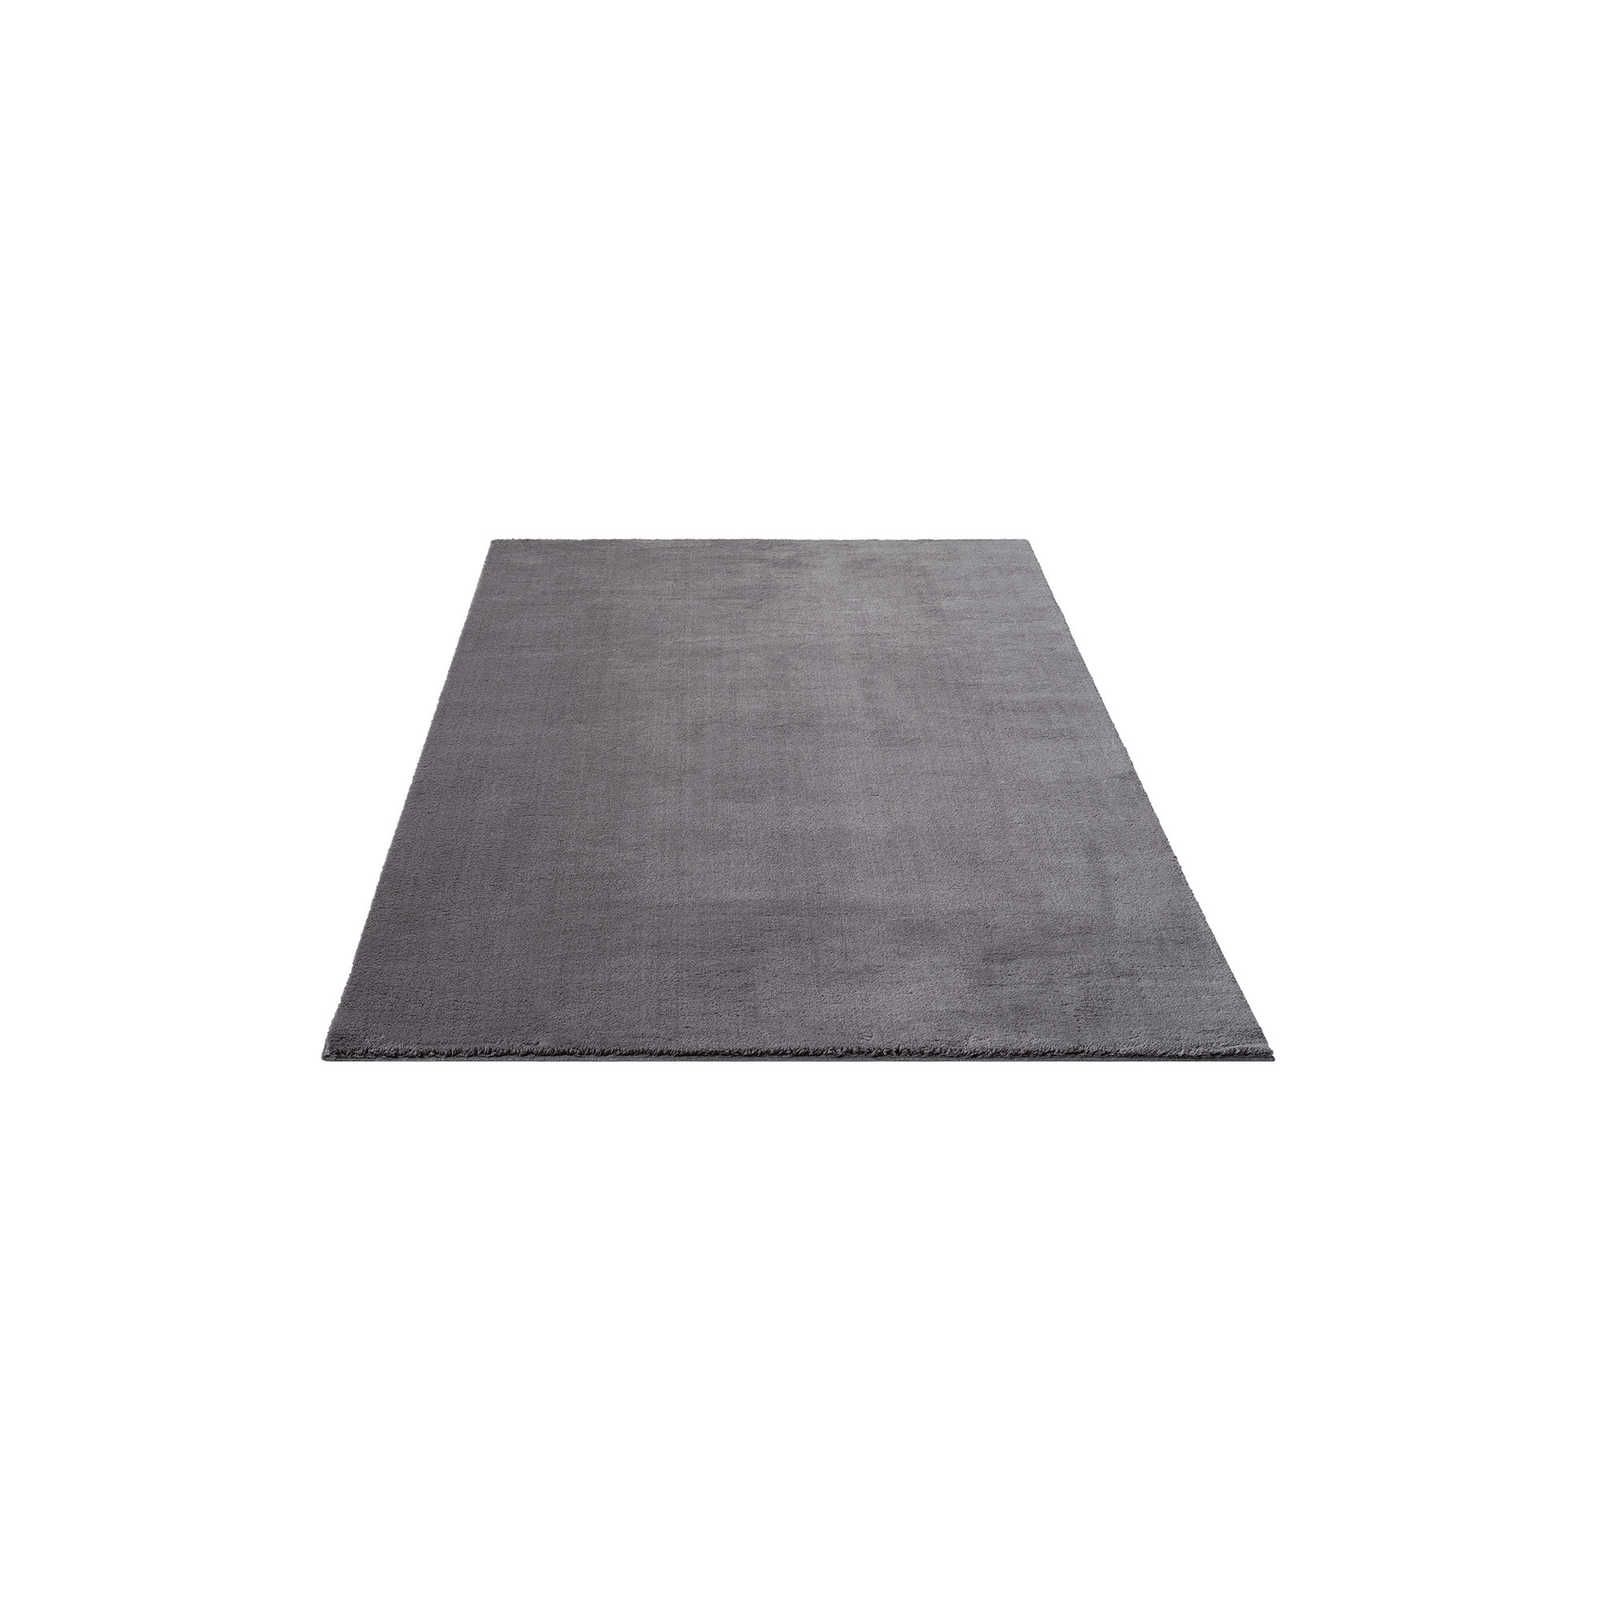 Fluffy high pile carpet in anthracite - 200 x 140 cm
